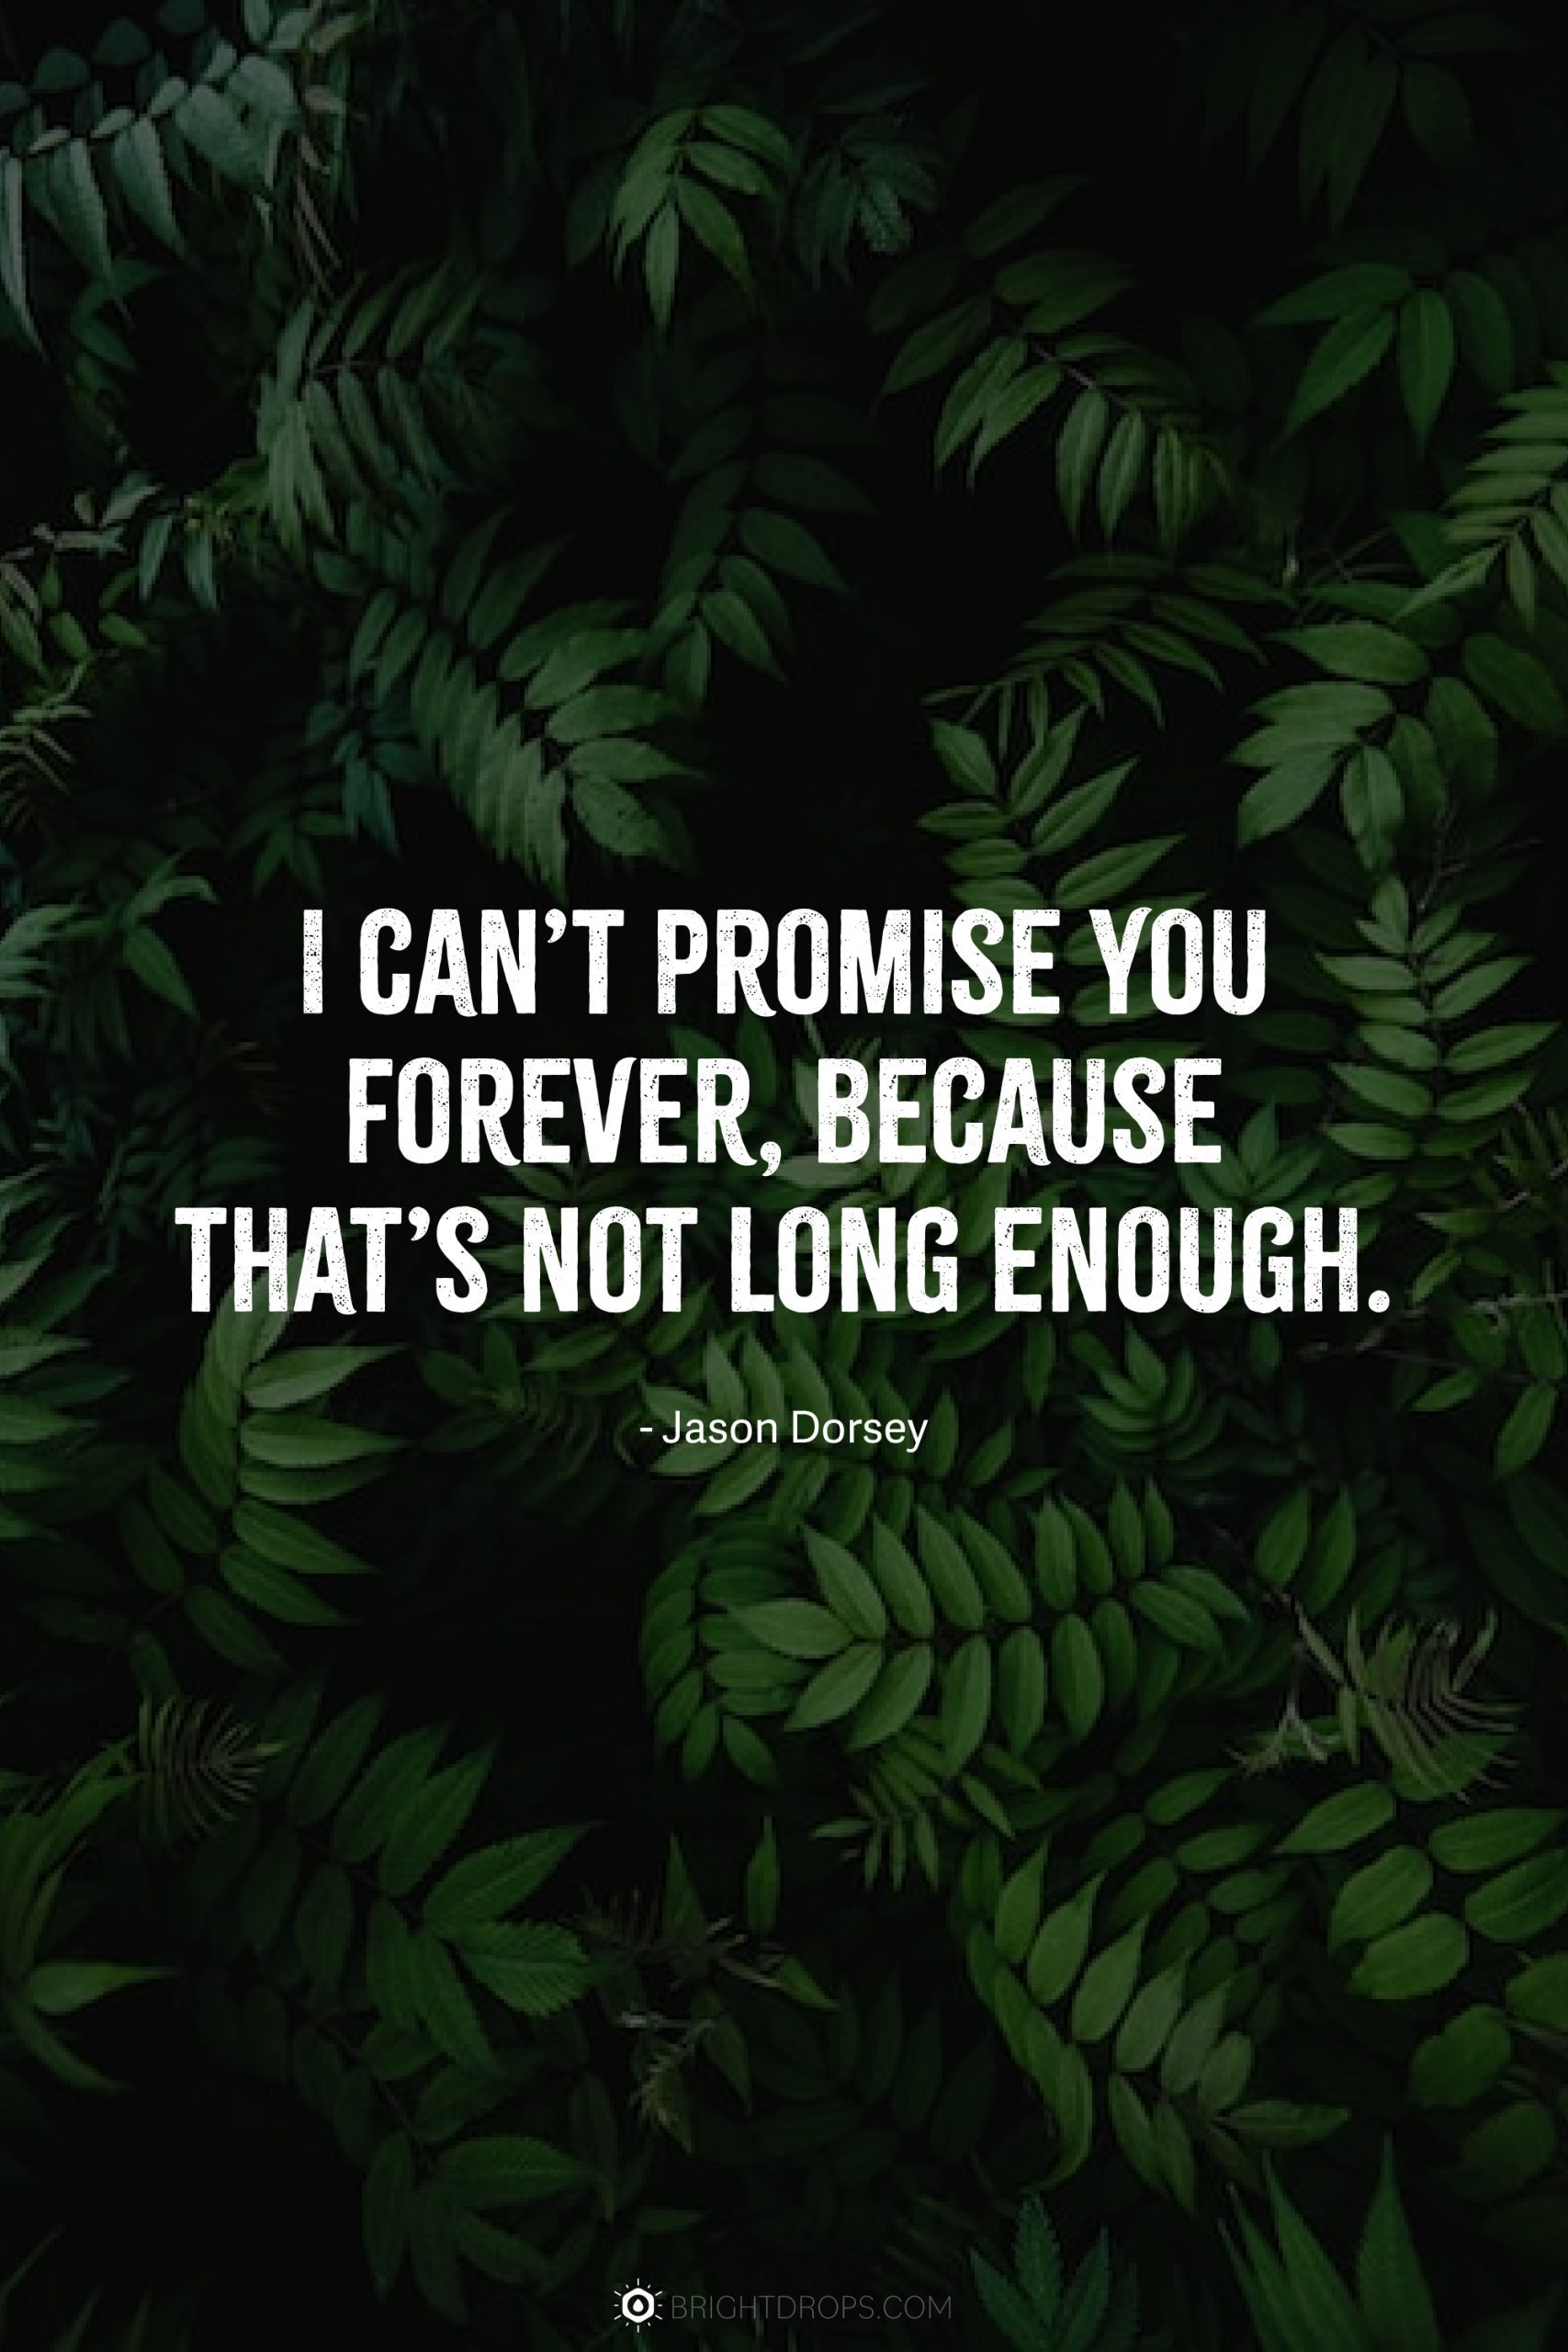 I can’t promise you forever, because that’s not long enough.